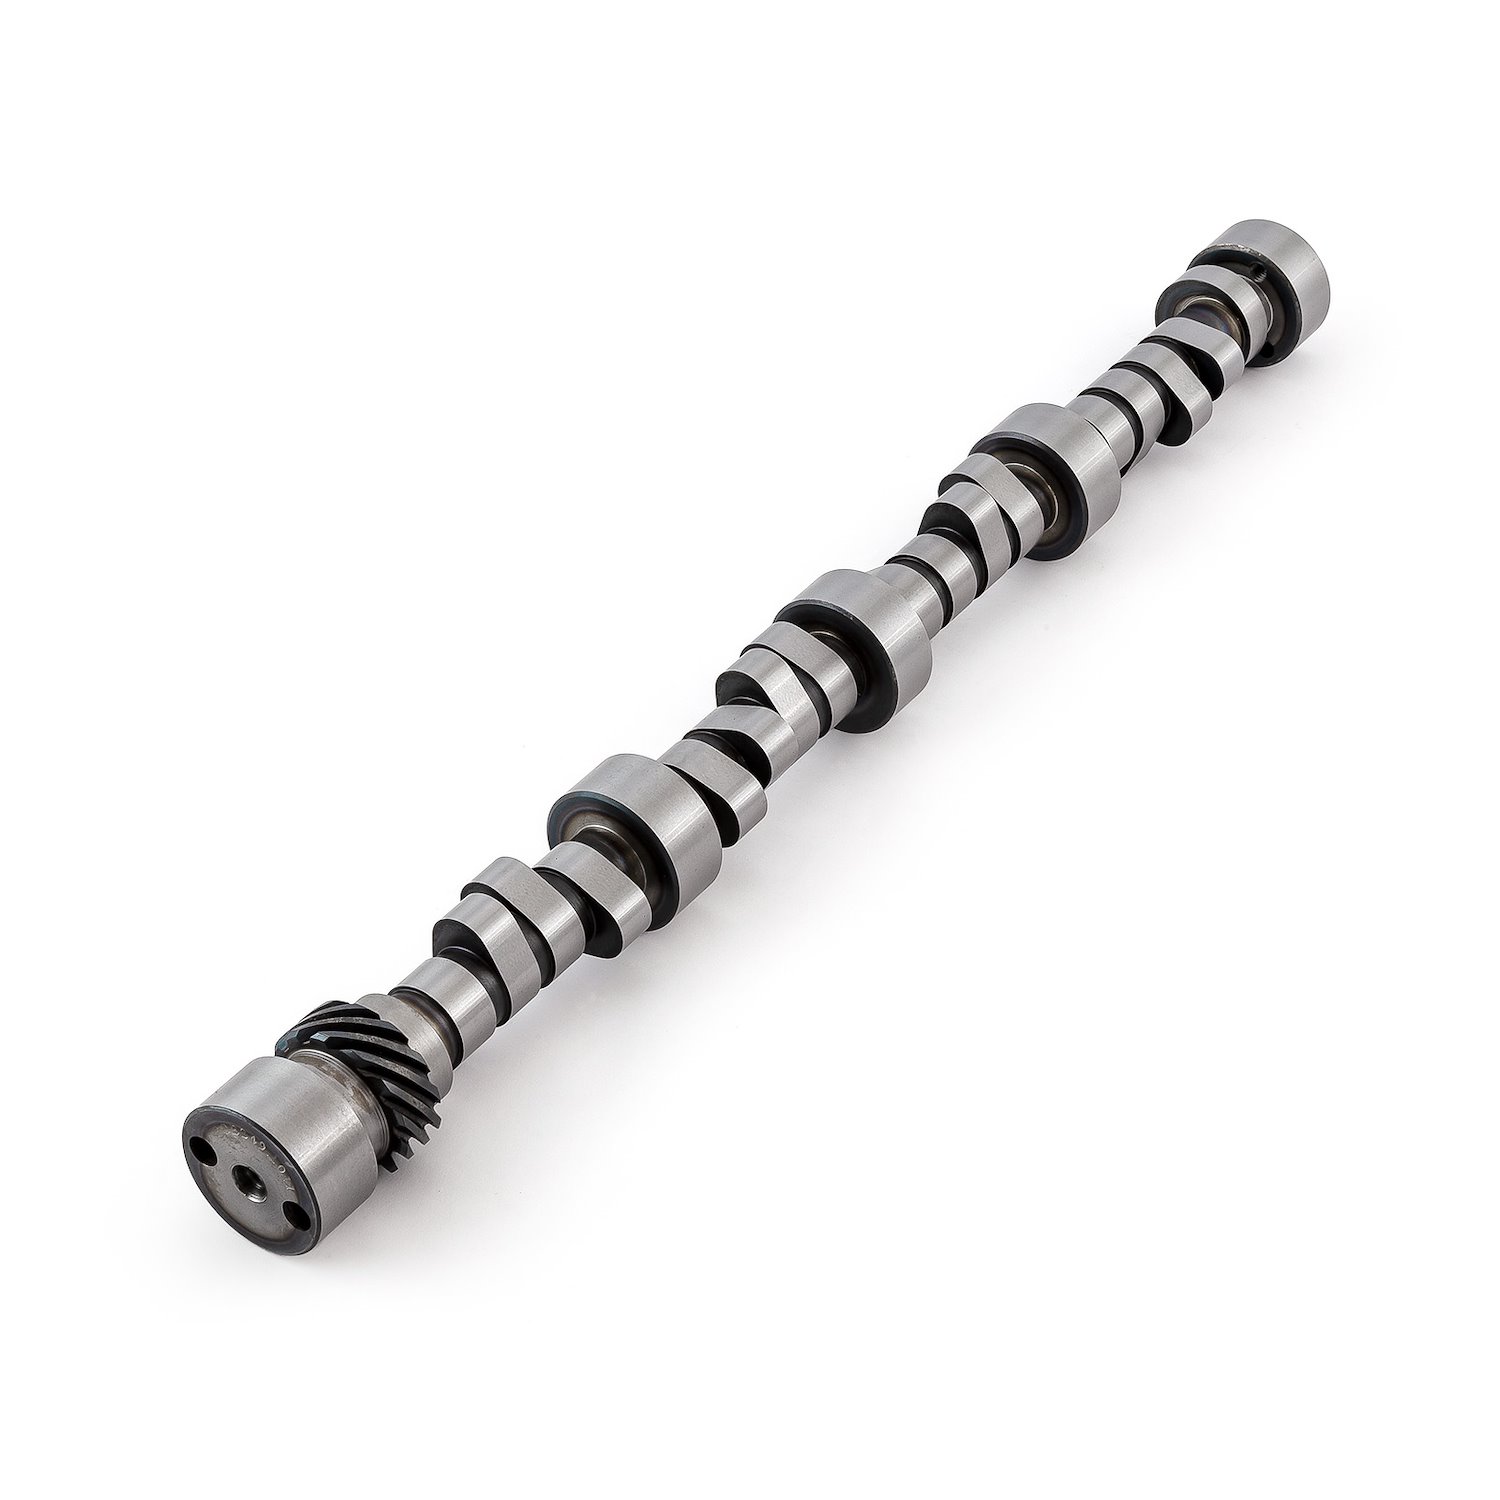 Hydraulic Roller Camshaft Small Block Chevy 350, 270 Int. 276 Exh. Duration